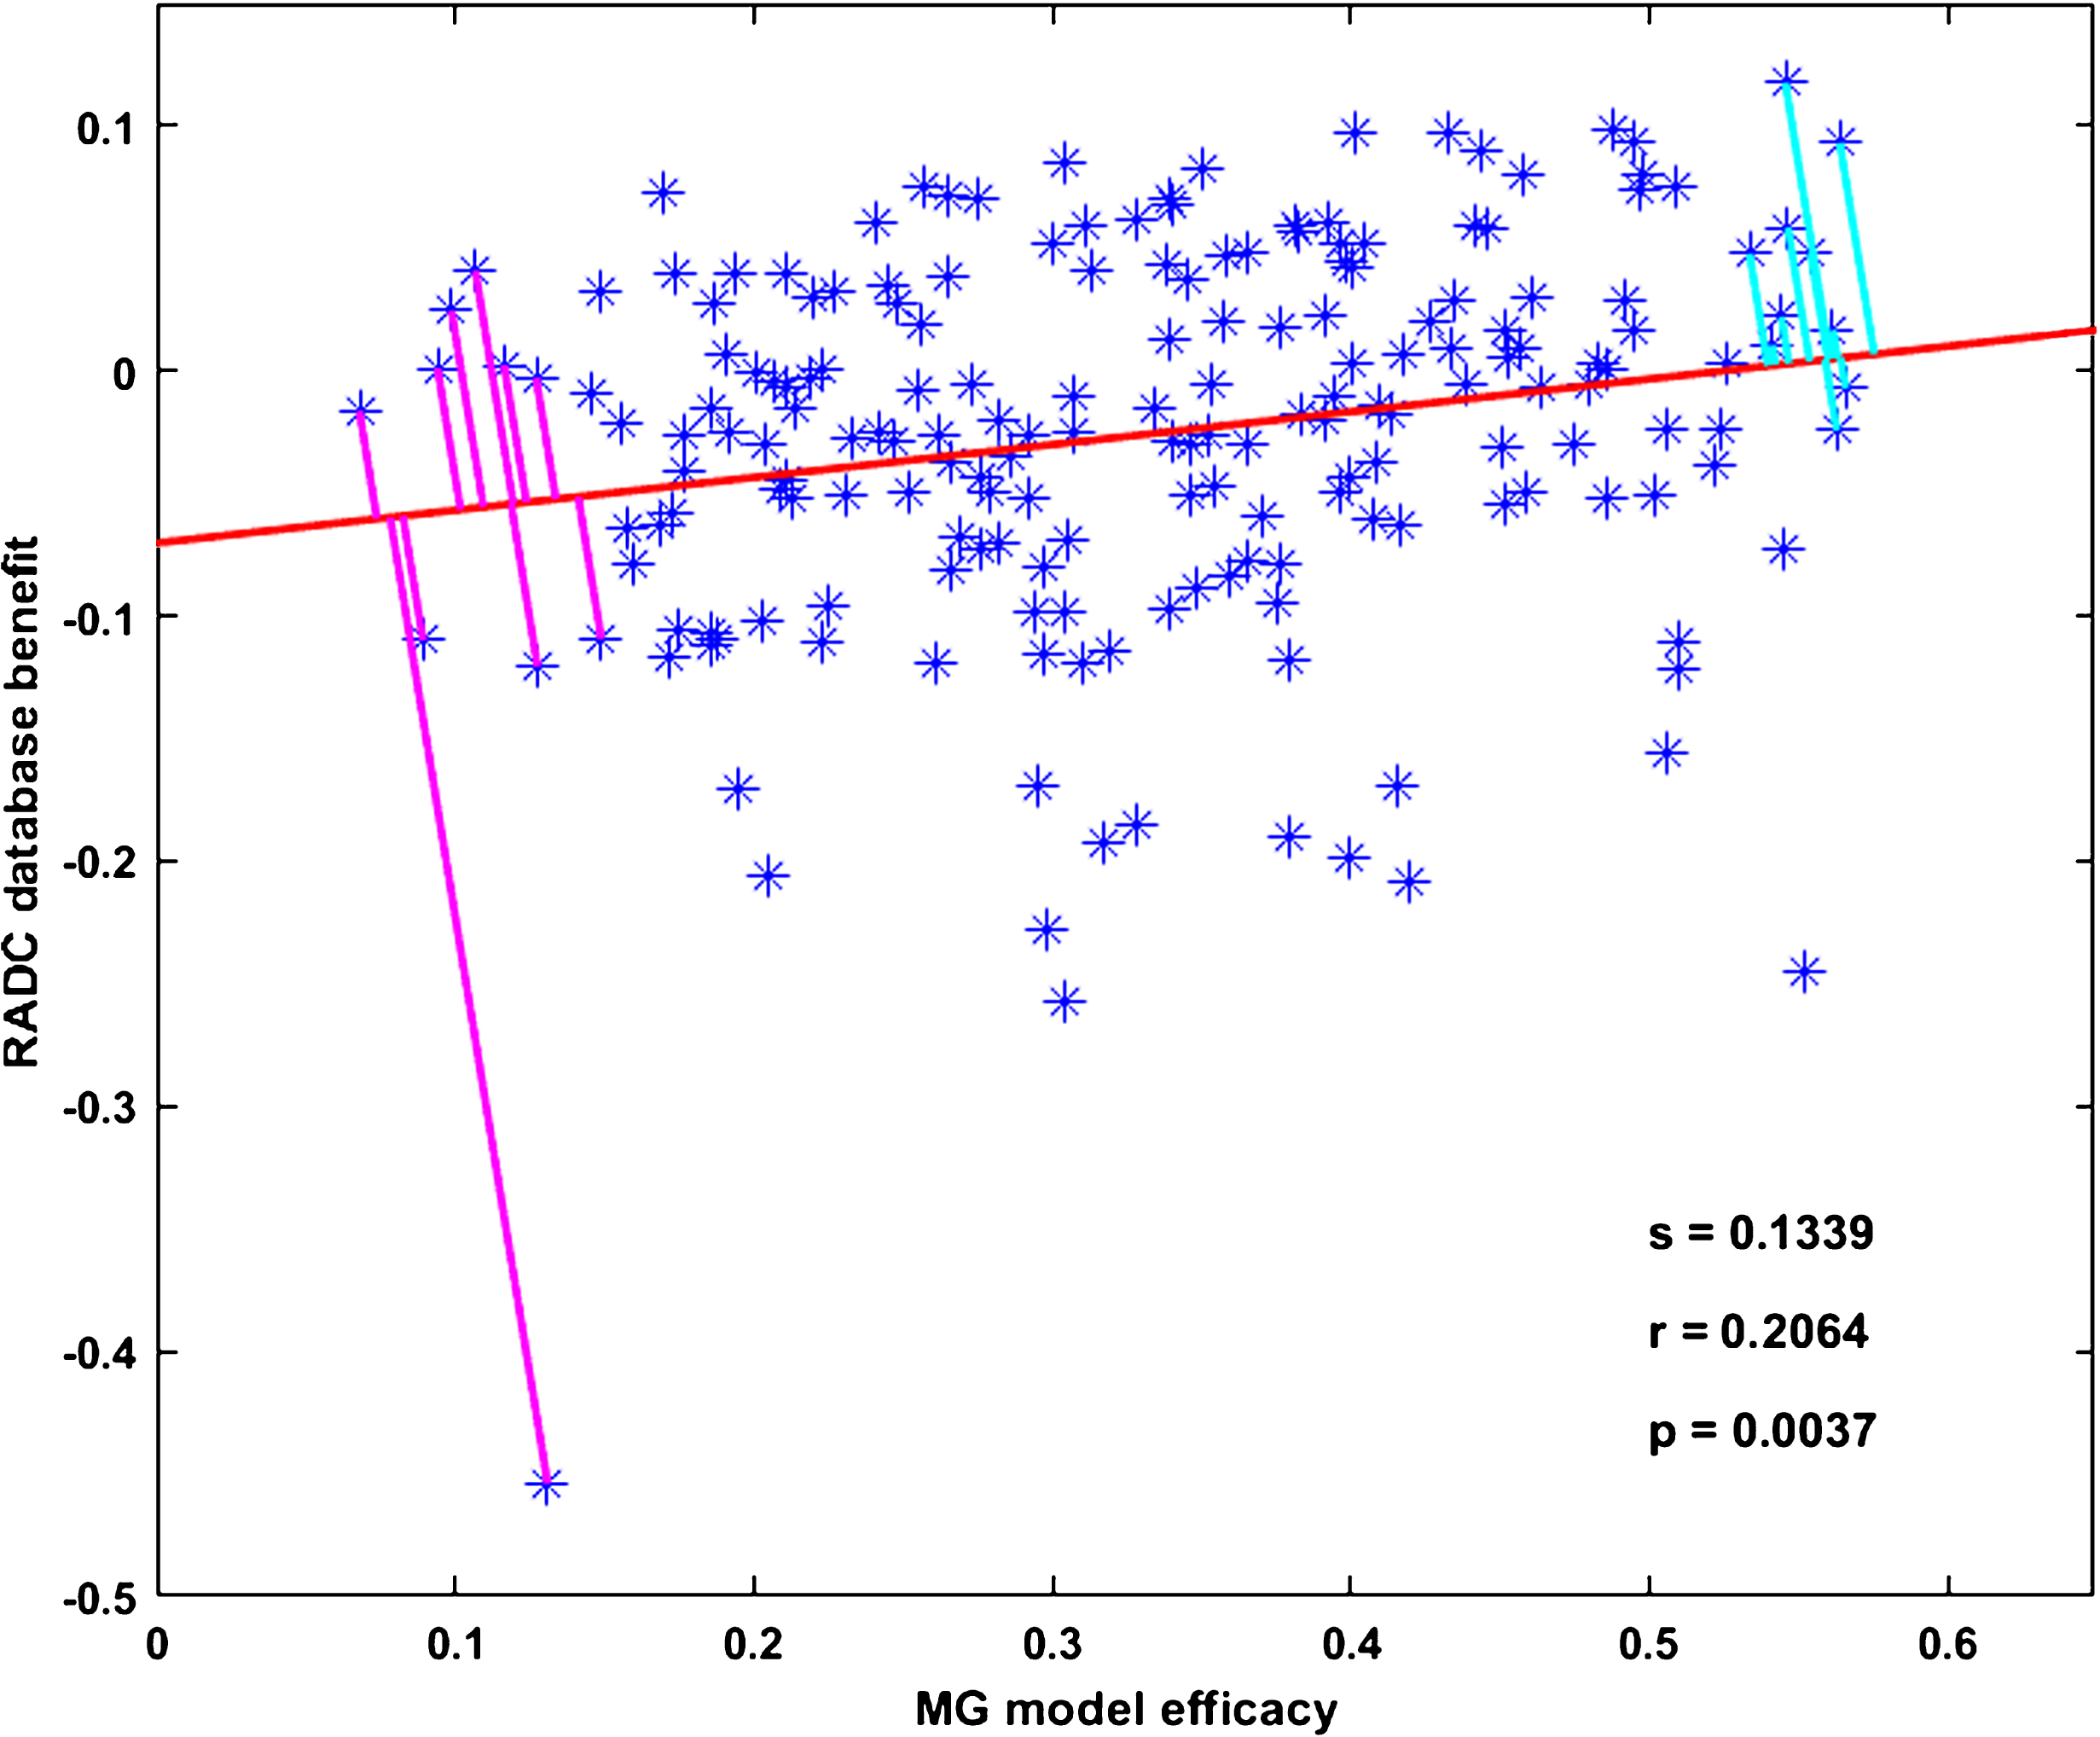 MG model efficacies and RADC database benefits are significantly correlated. Each point represents one of the 196 drug combinations that was included in the main analysis. The regression line fit to the data points has slope s = 0.1339, correlation coefficient r = 0.2064, and p-value p = 0.0037. The perpendicular line segments drawn from the points to the regression line are the projections of the points onto the regression line. The projections show the Ten Best (upper right) and the Ten Worst (lower left) drug combinations, as determined jointly by the MG model and the RADC database according to the distance along the regression line from the y-intercept to the intersection of the projections with the regression line. Note that the lengths of the projections themselves are probably meaningless.